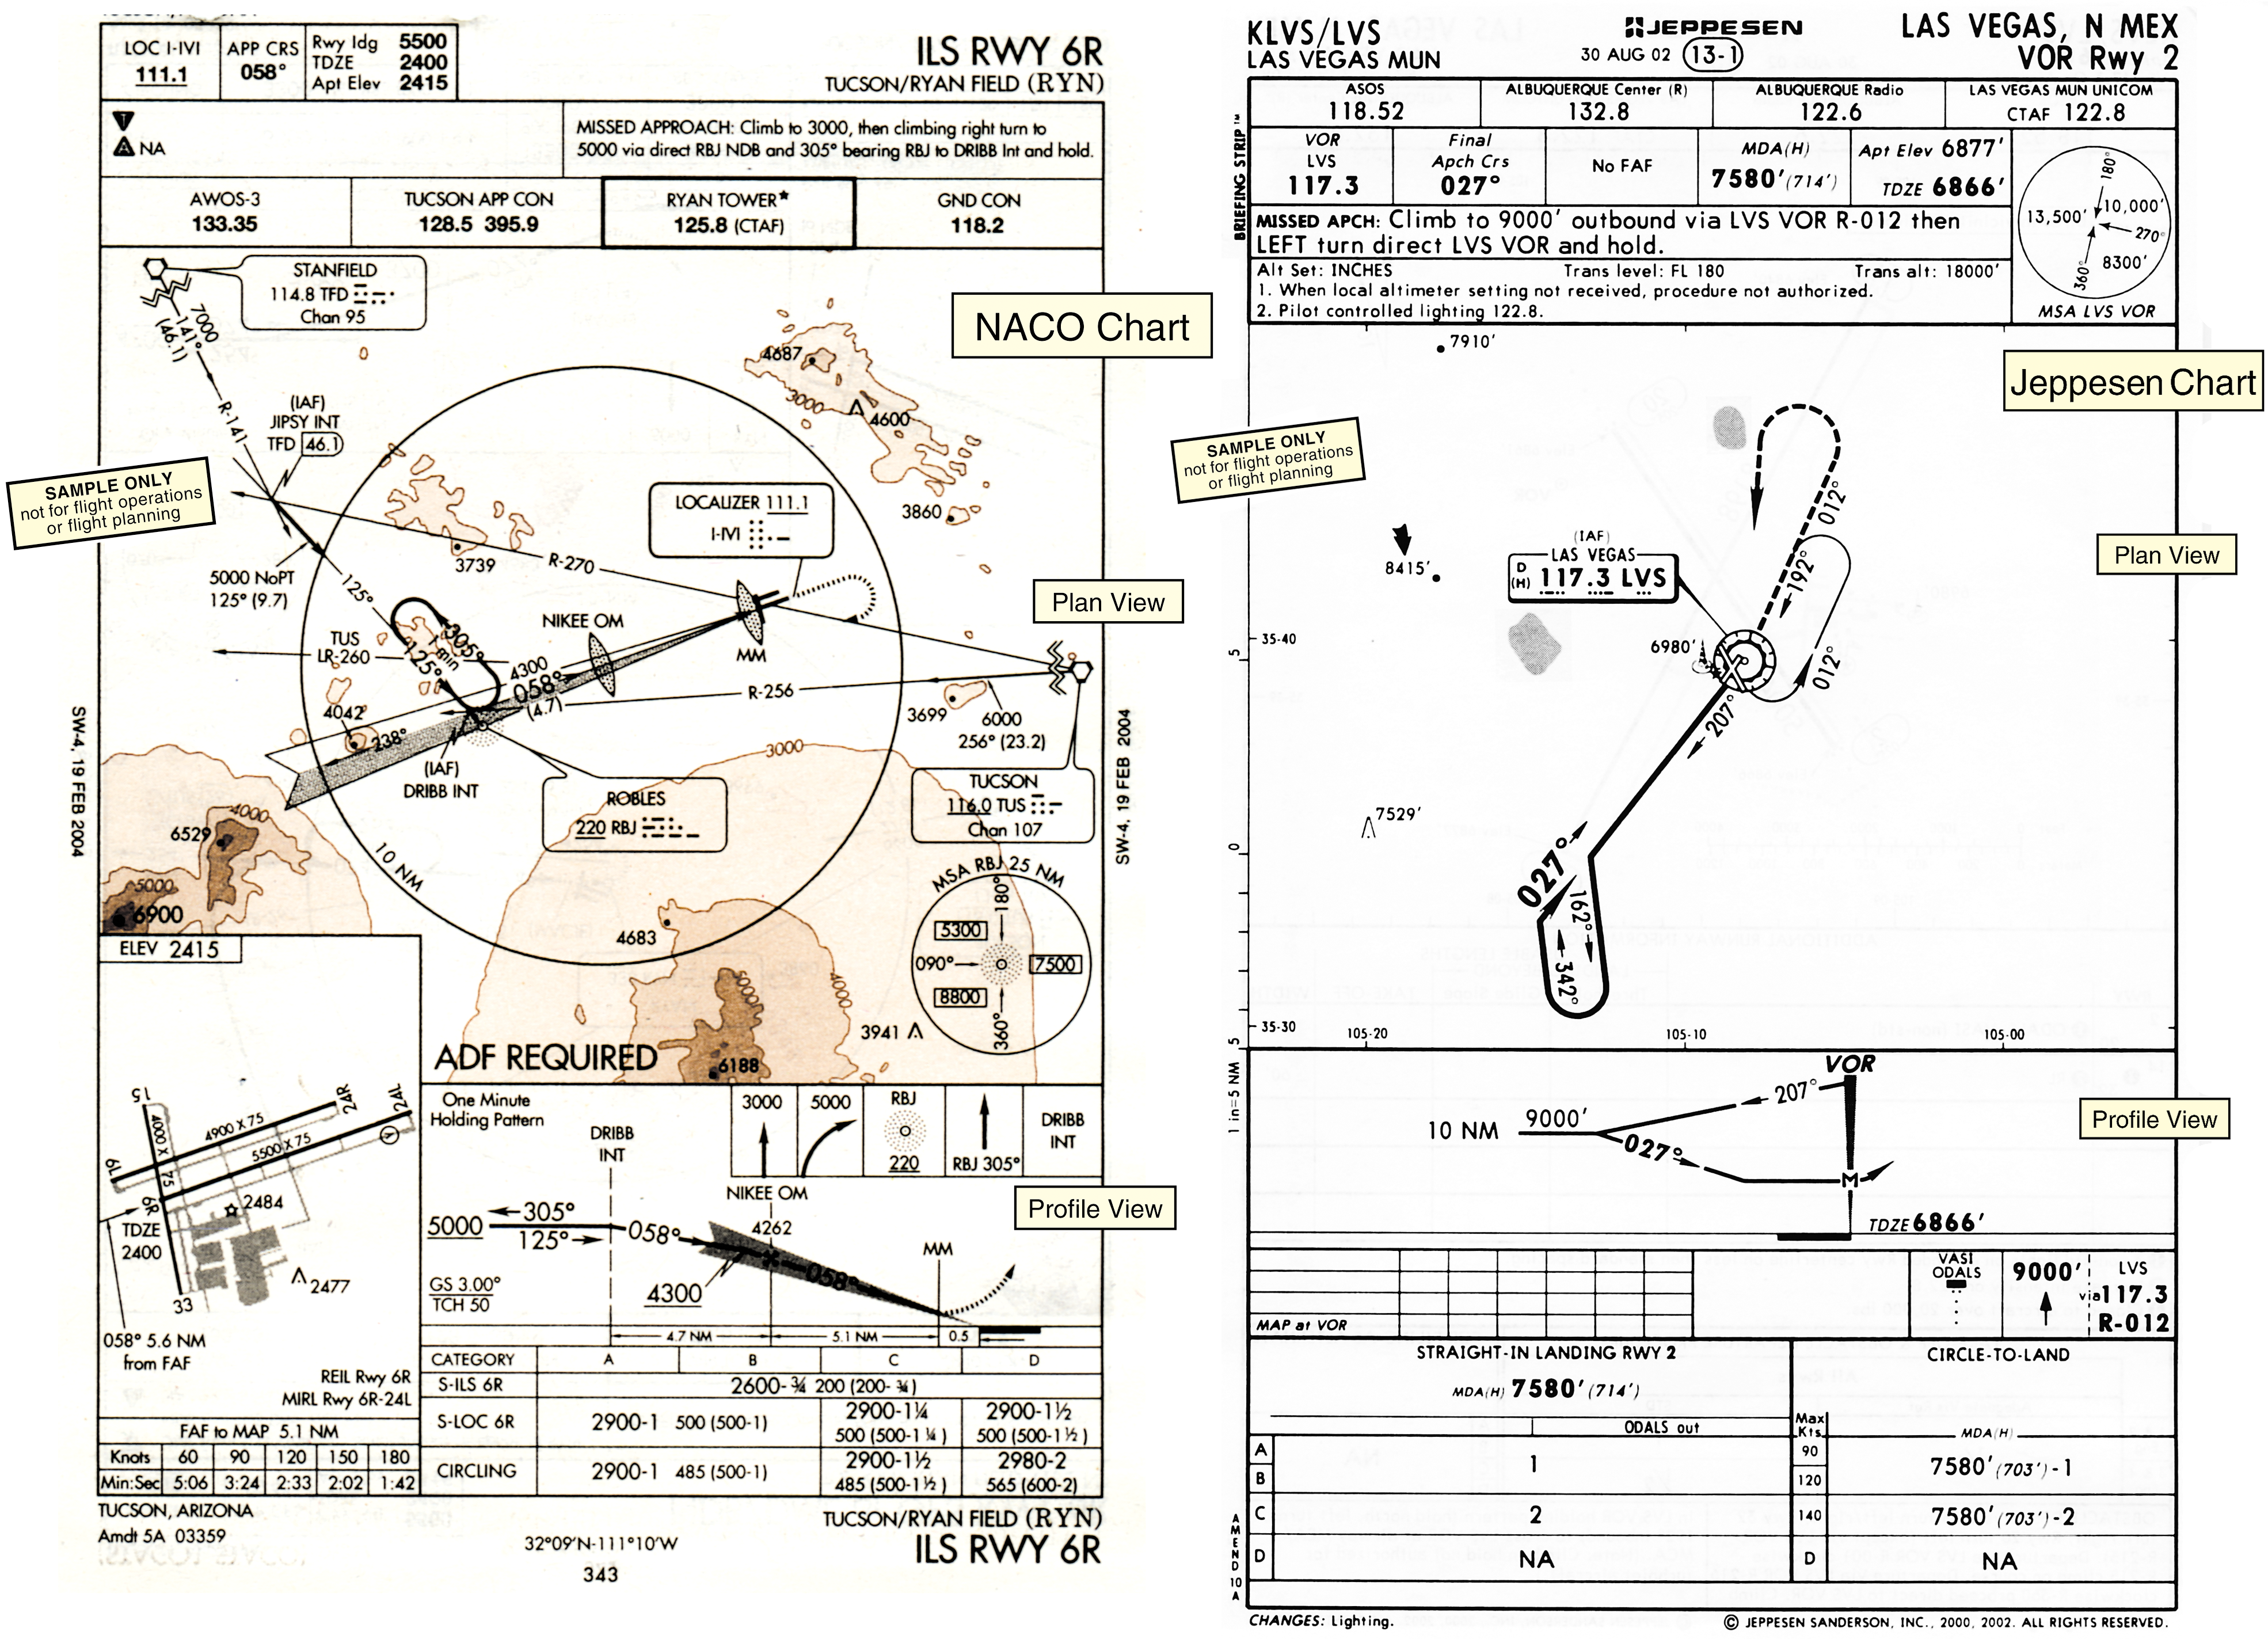 Left: plan and profile views of a precision instrument approach (NACO chart). Right: plan and profile views of a nonprecision approach (Jeppesen chart).